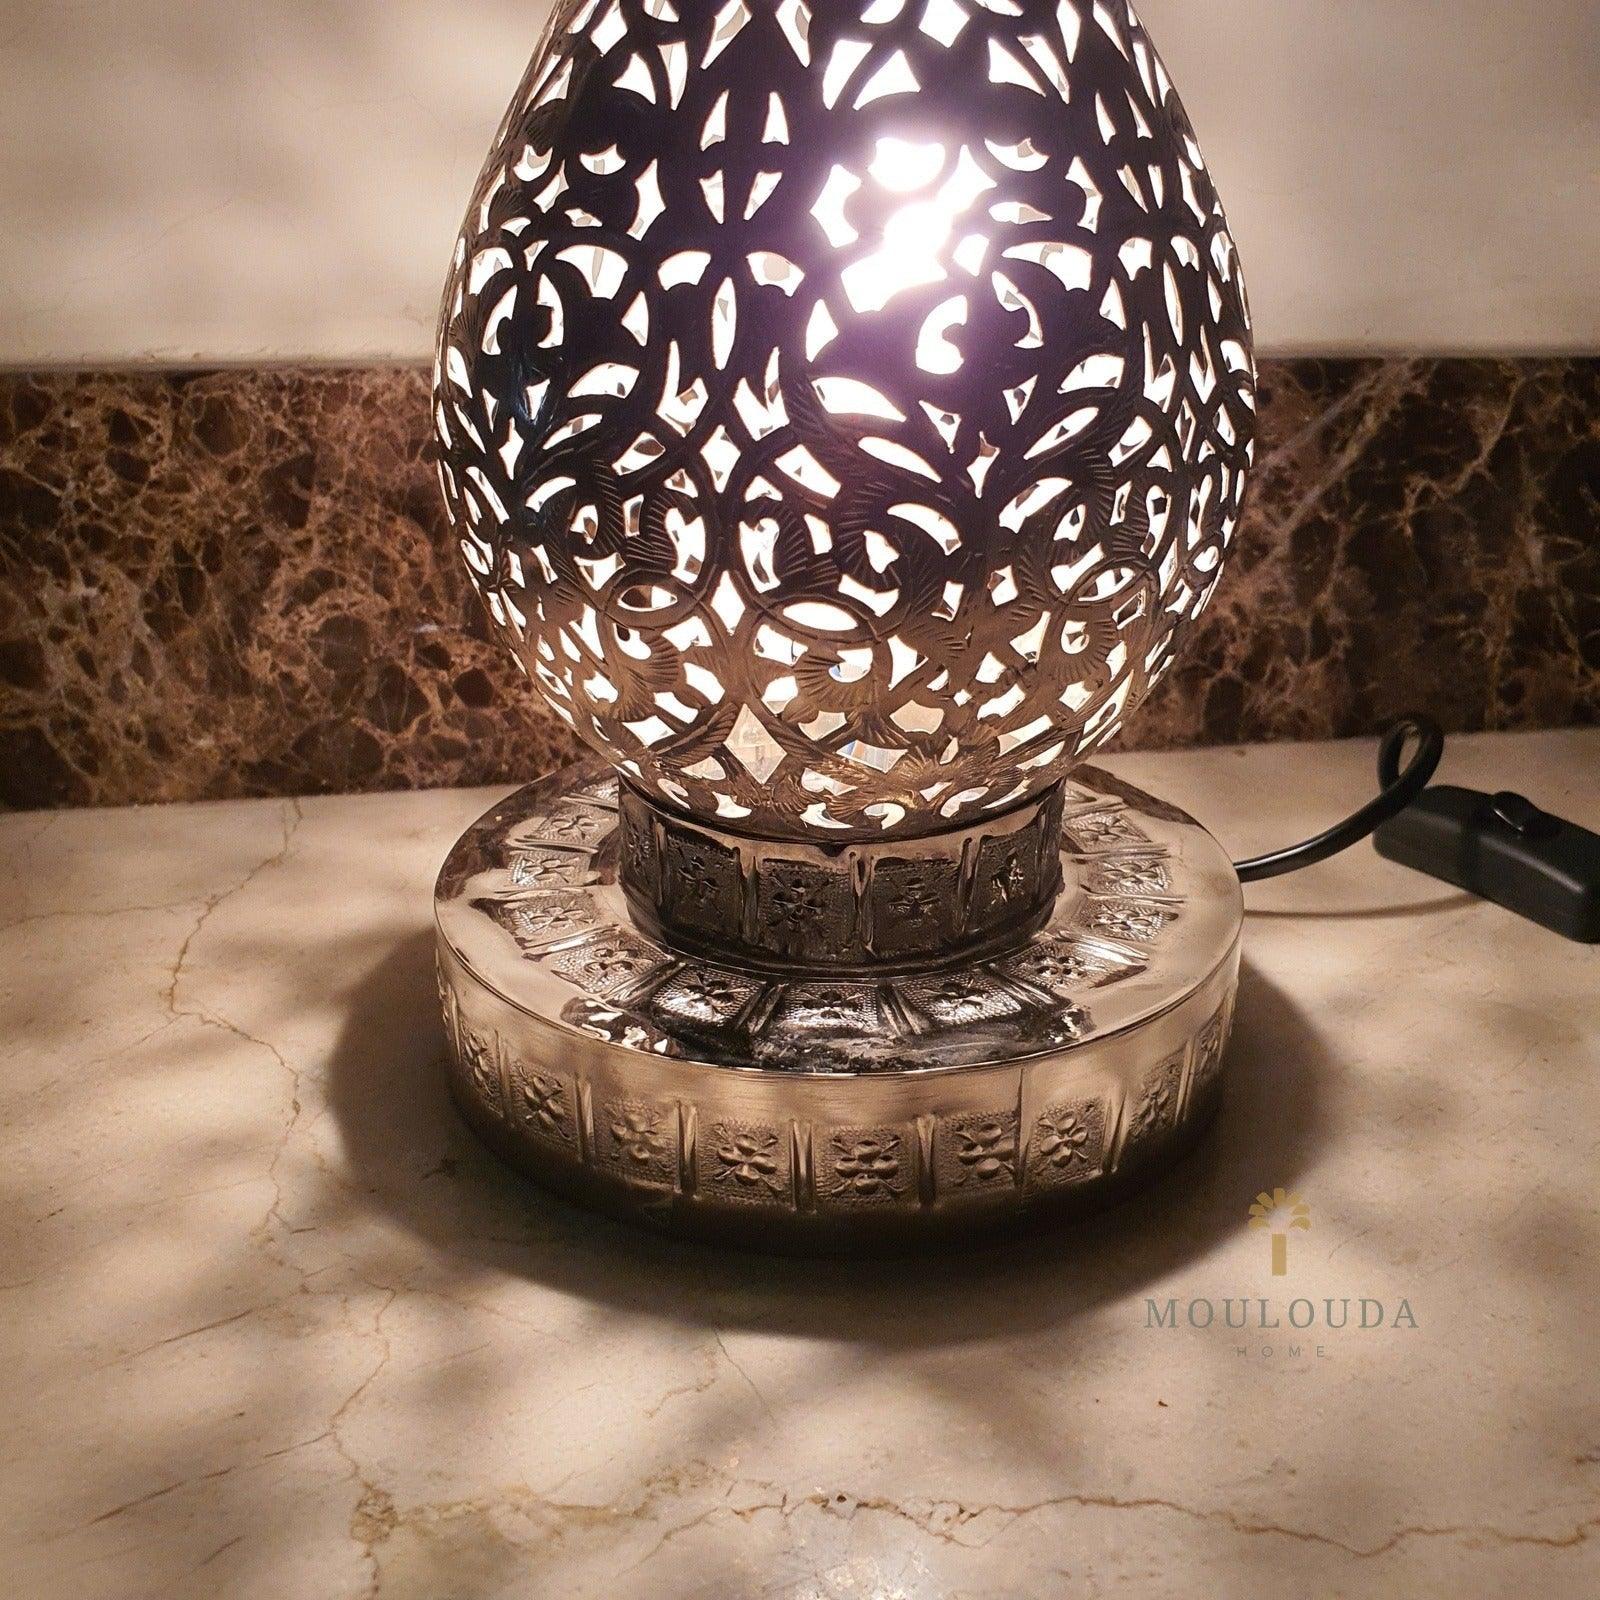 Moroccan Table Lamp - Add Beauty to Your Home Decor - Mouloudahome